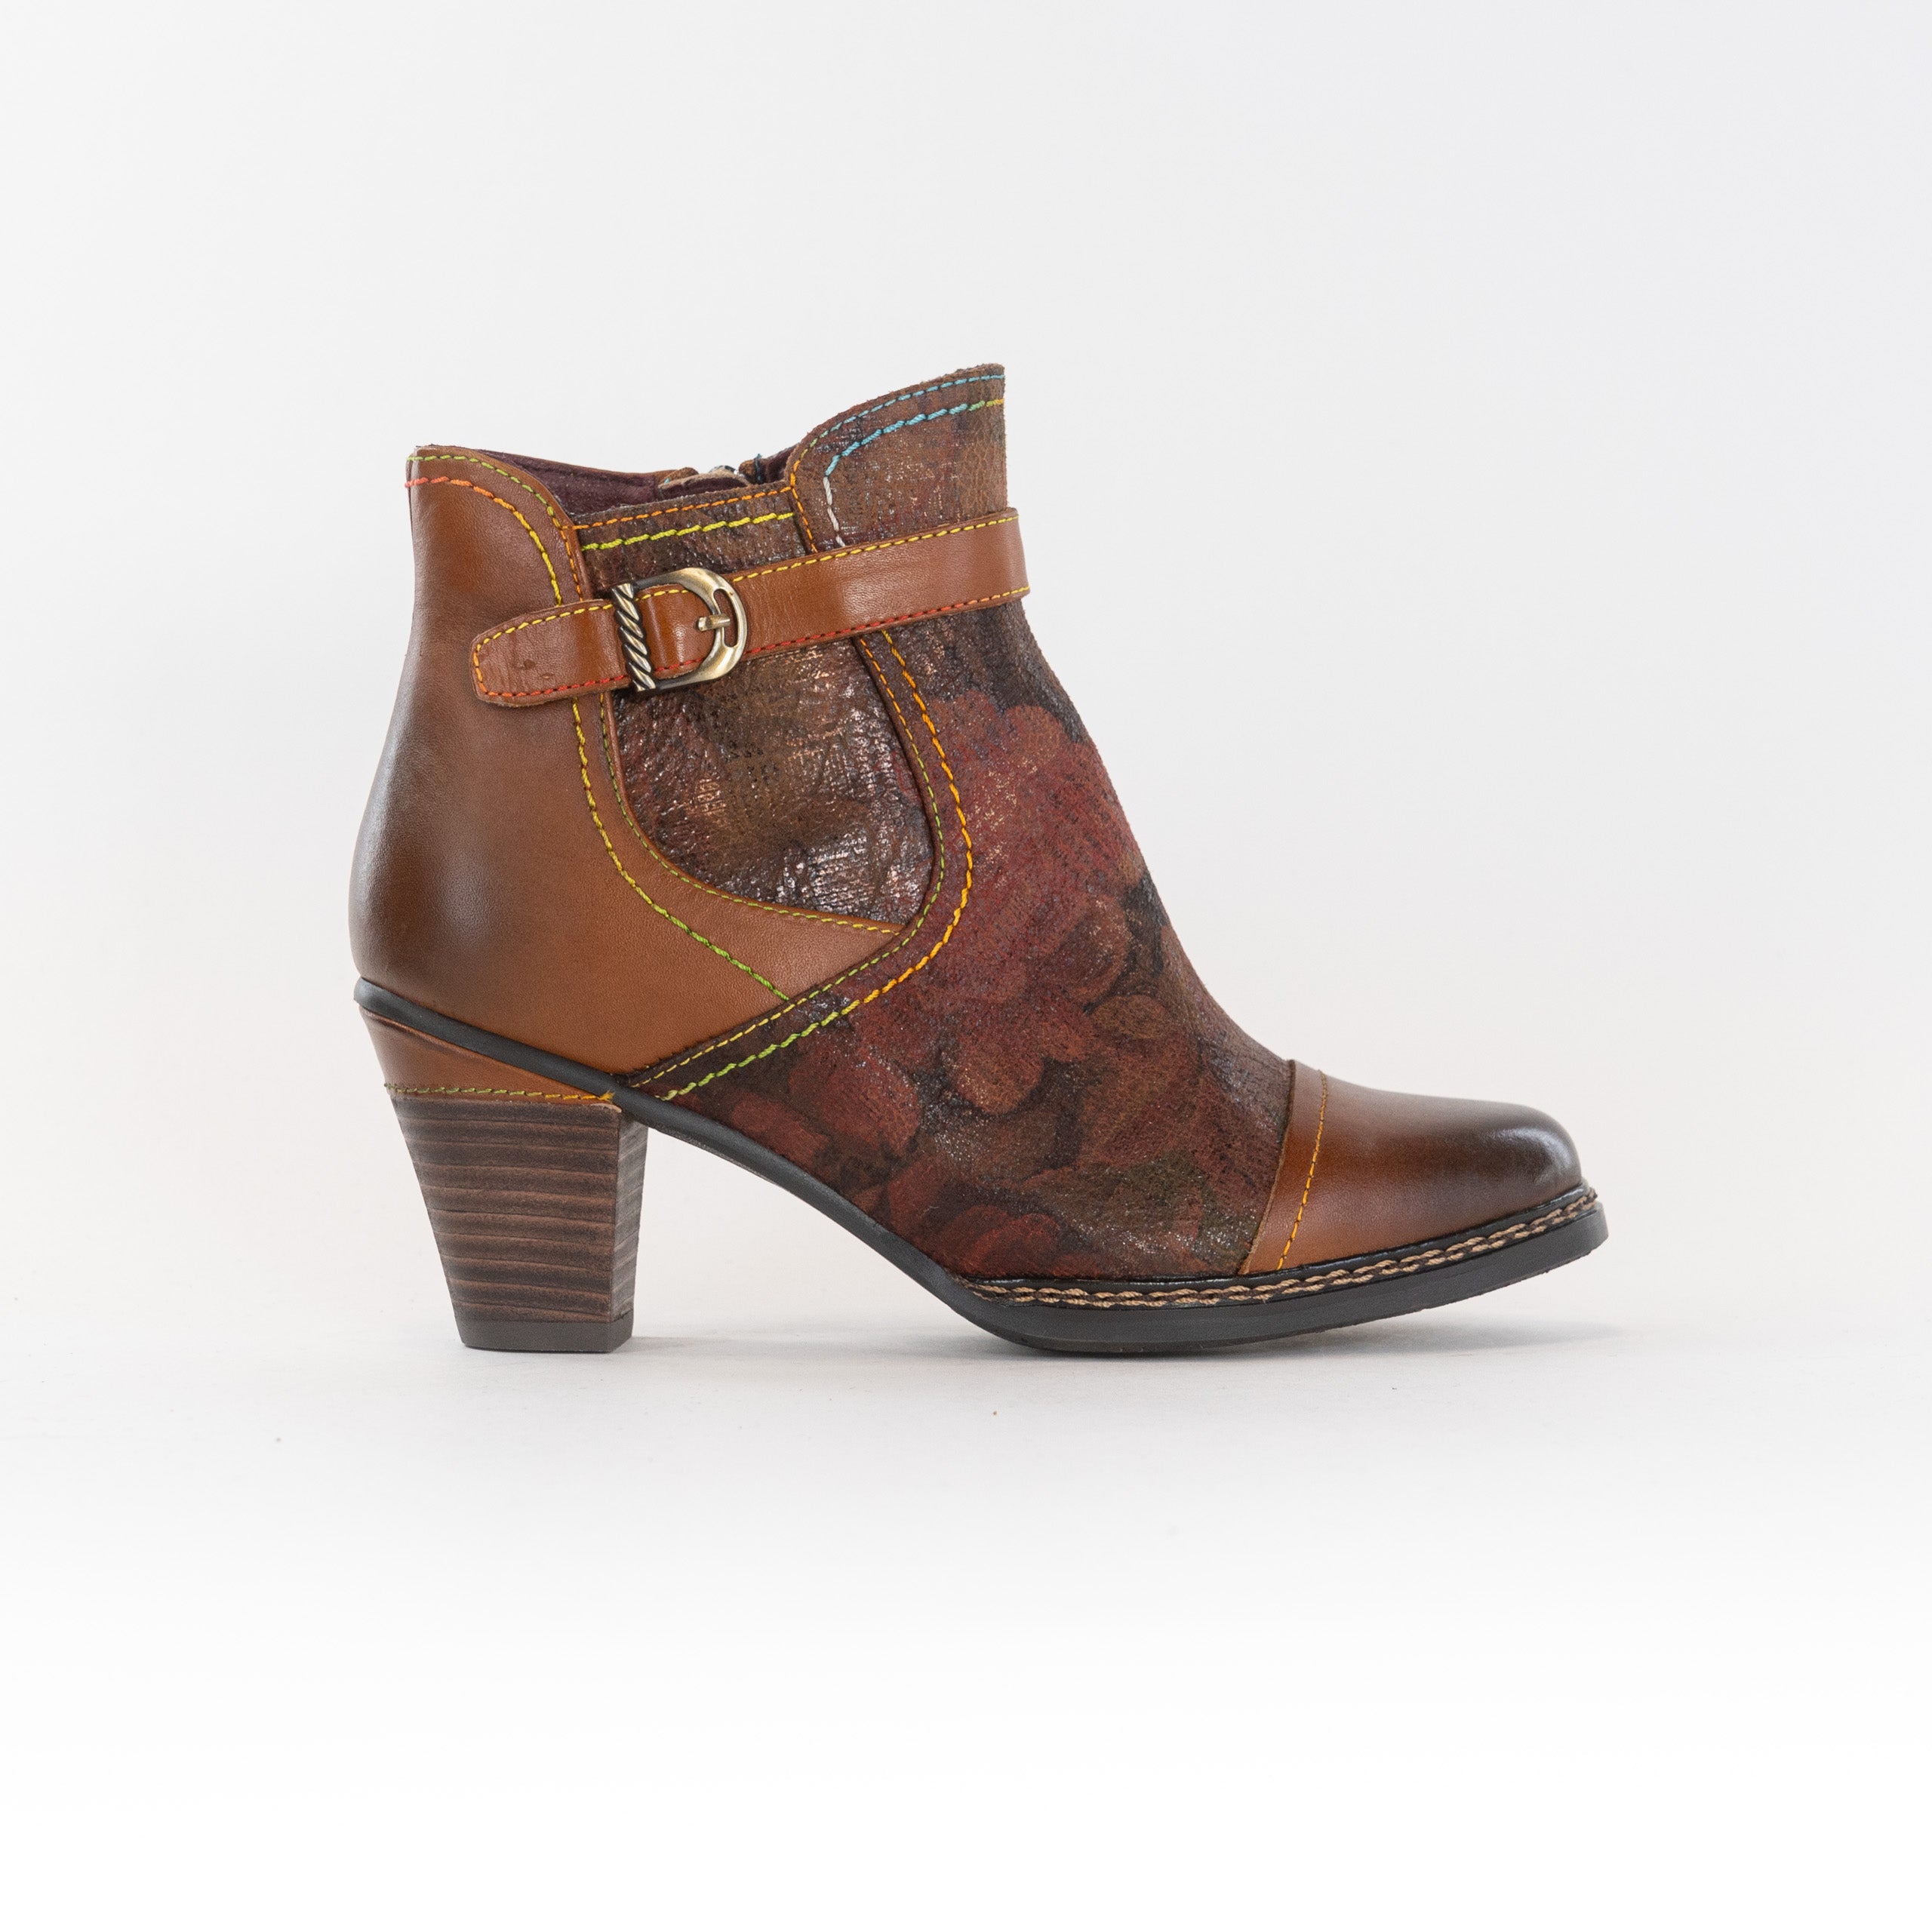 Spring Step Captivate (Women's) - Brown Multi